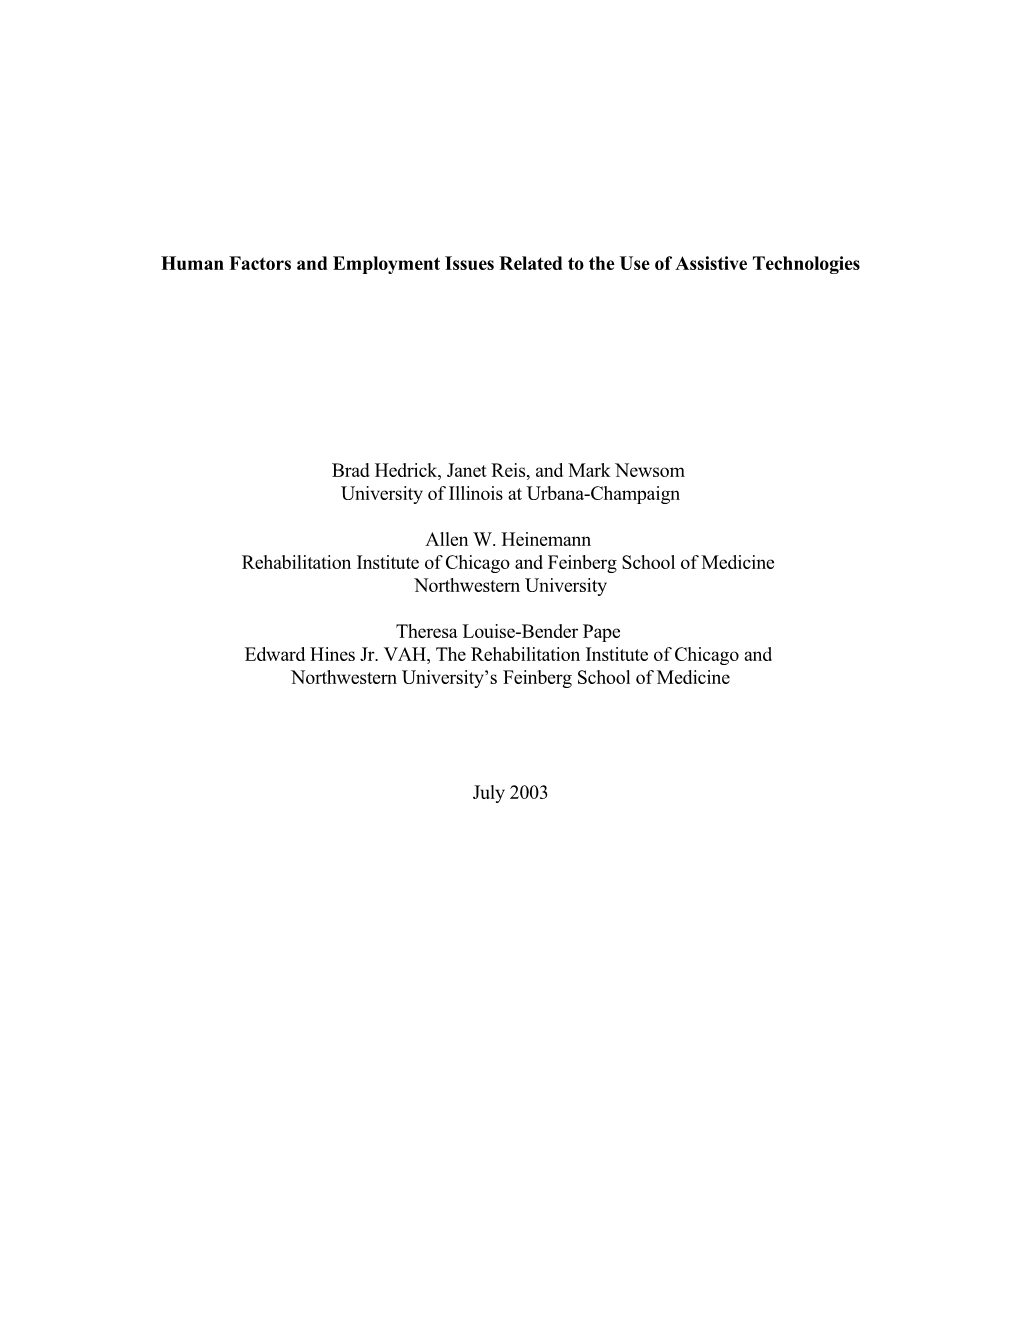 Human Factors and Employment Issues Related to the Use of Assistive Technologies